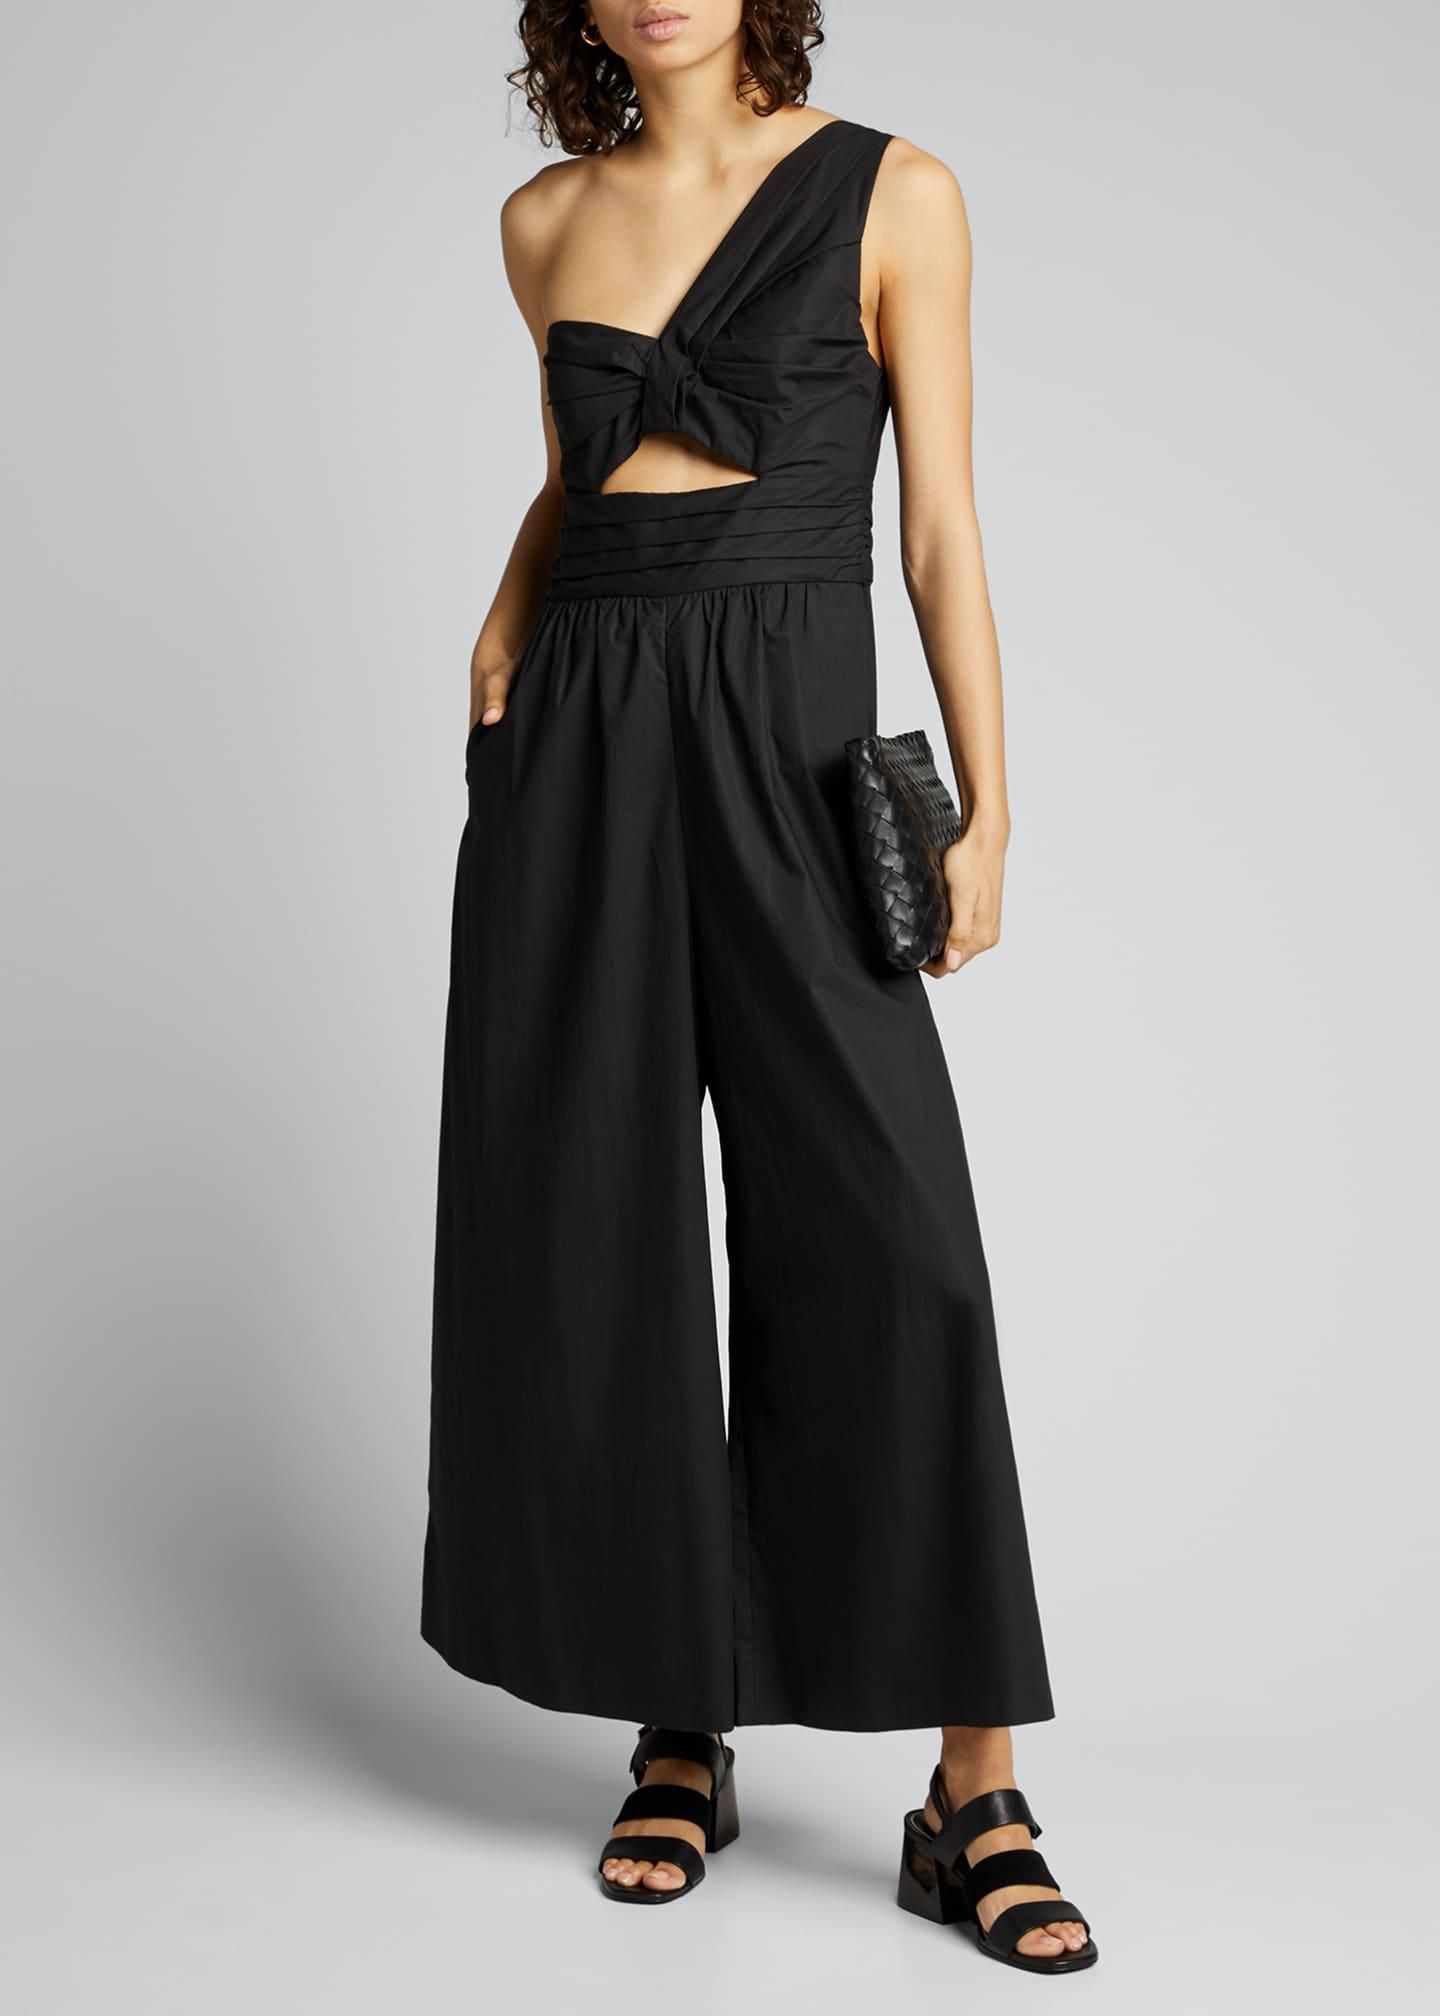 13 Stylish Wedding Jumpsuits For 2023 - Brit + Co